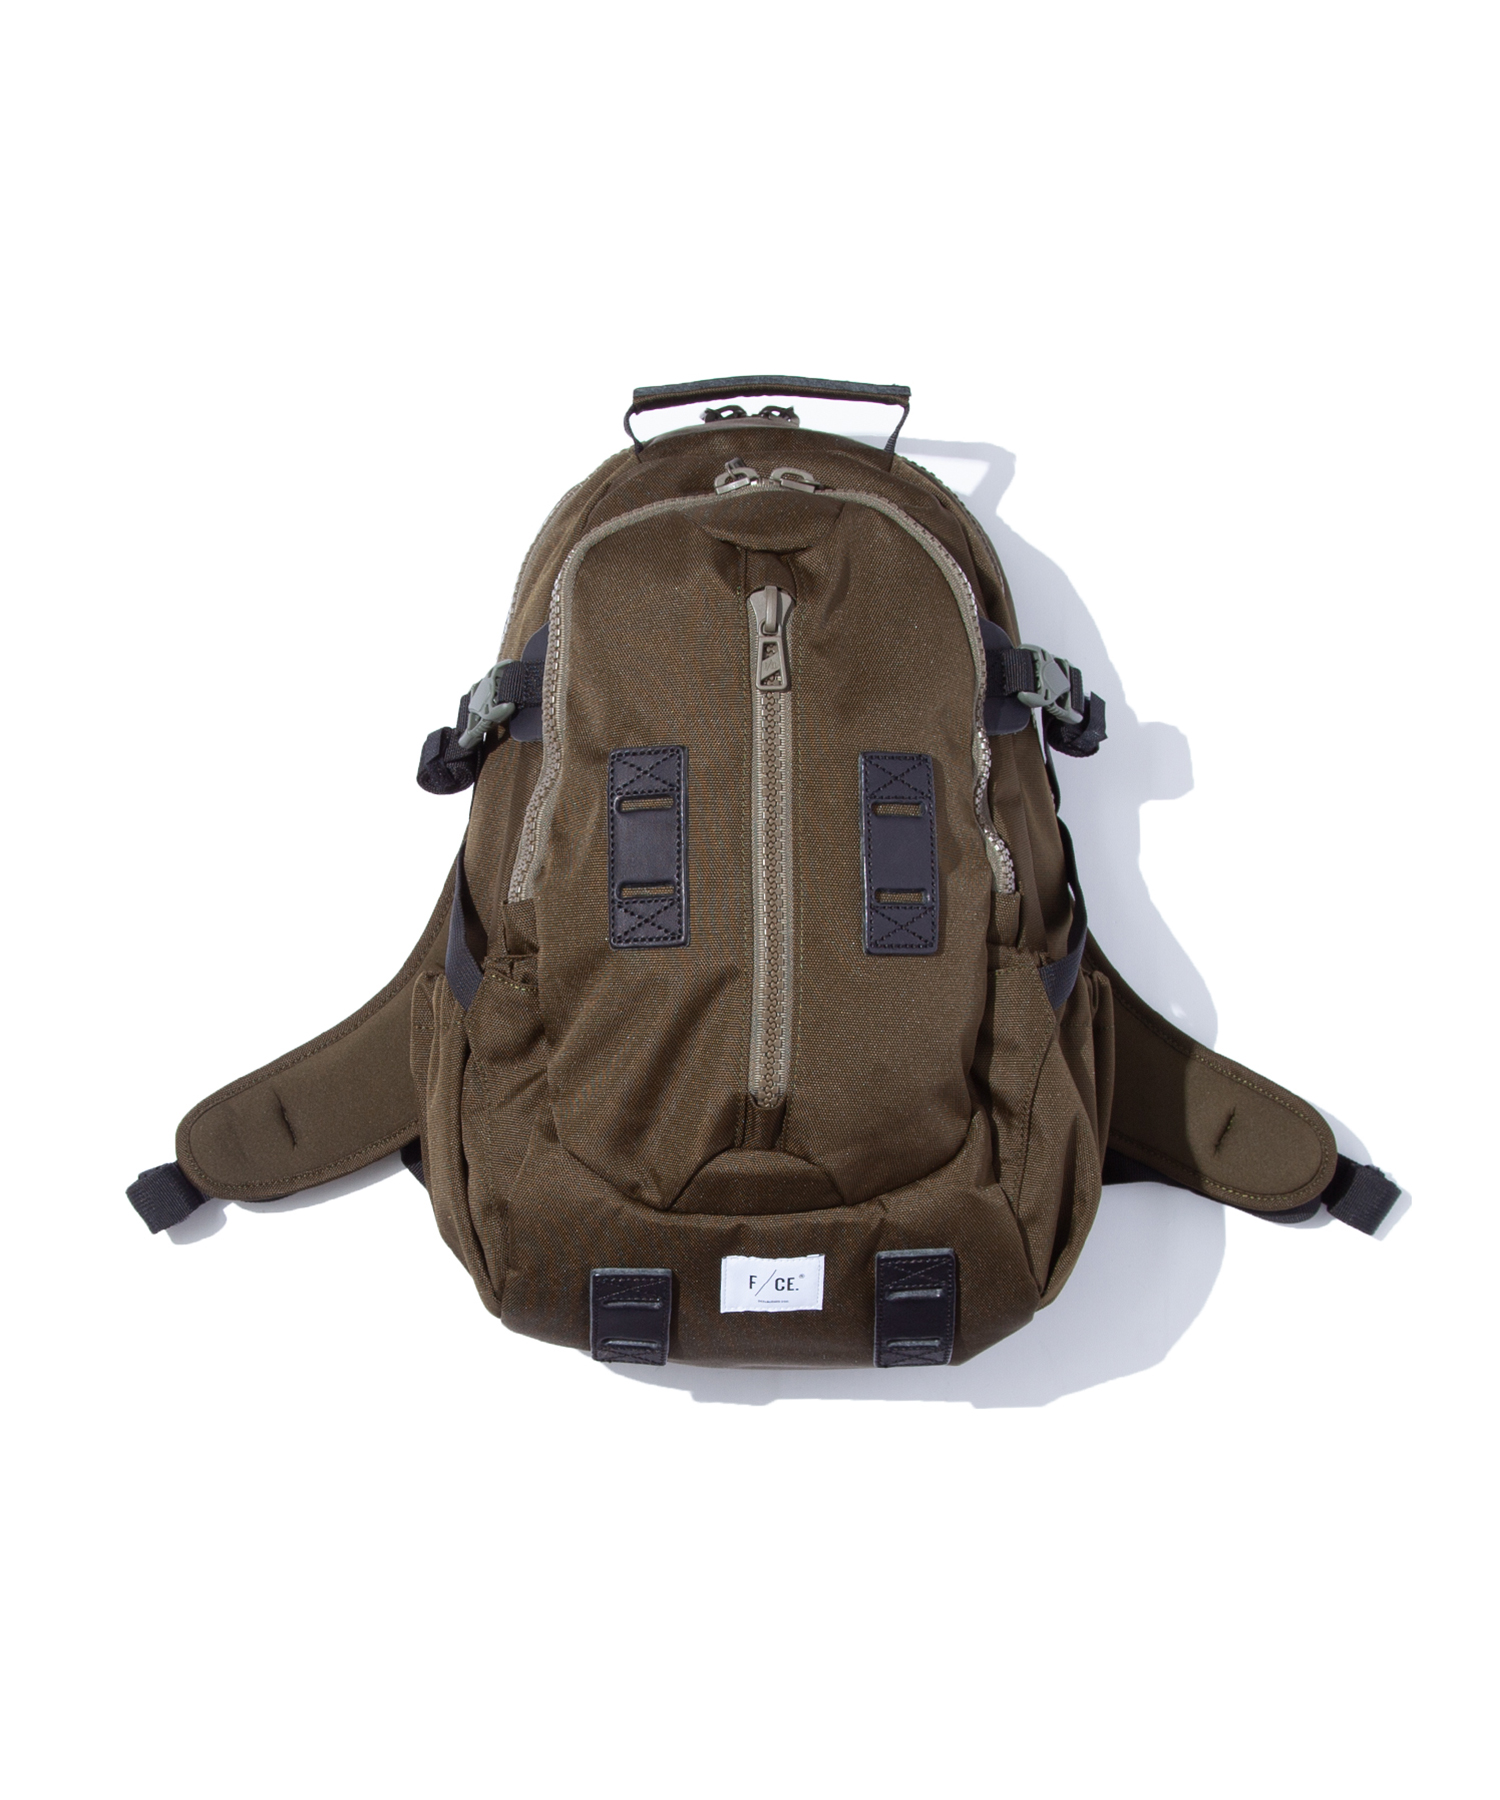 F/CE. 950 TRAVEL BACKPACK / 950 バックパック